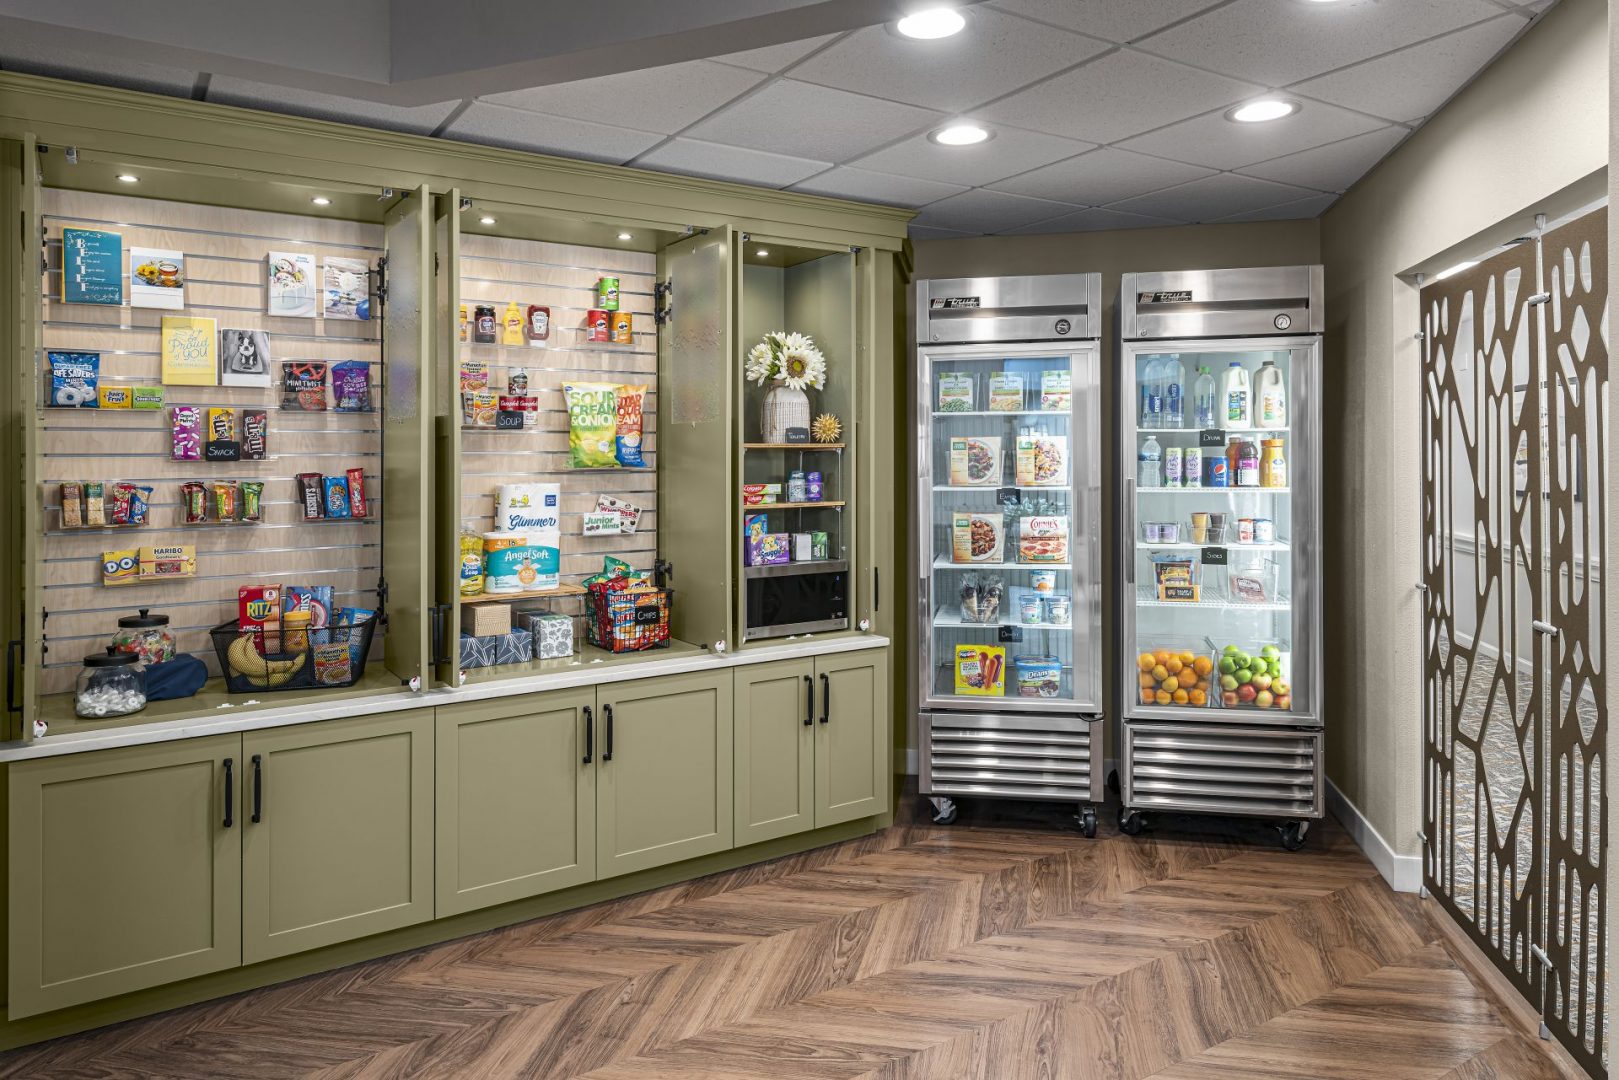 Grab-and-go snack and beverage area in a senior living community with shelves and refrigerators.